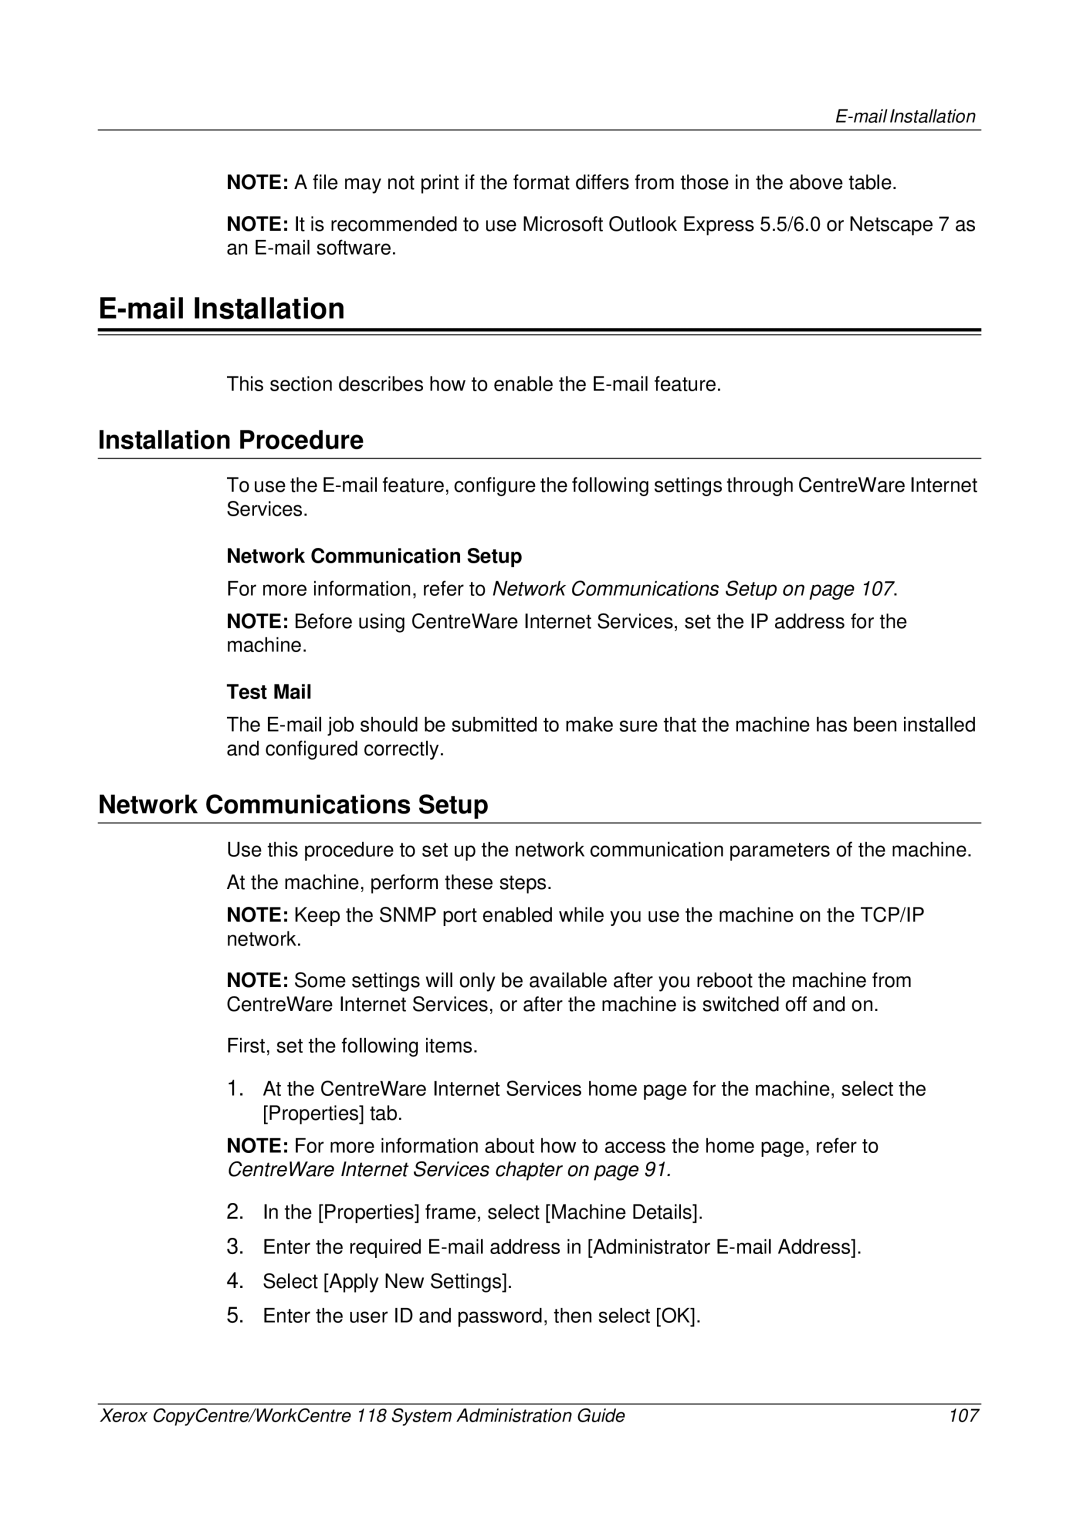 Xerox 701P42722_EN manual Mail Installation, Network Communications Setup, Test Mail 